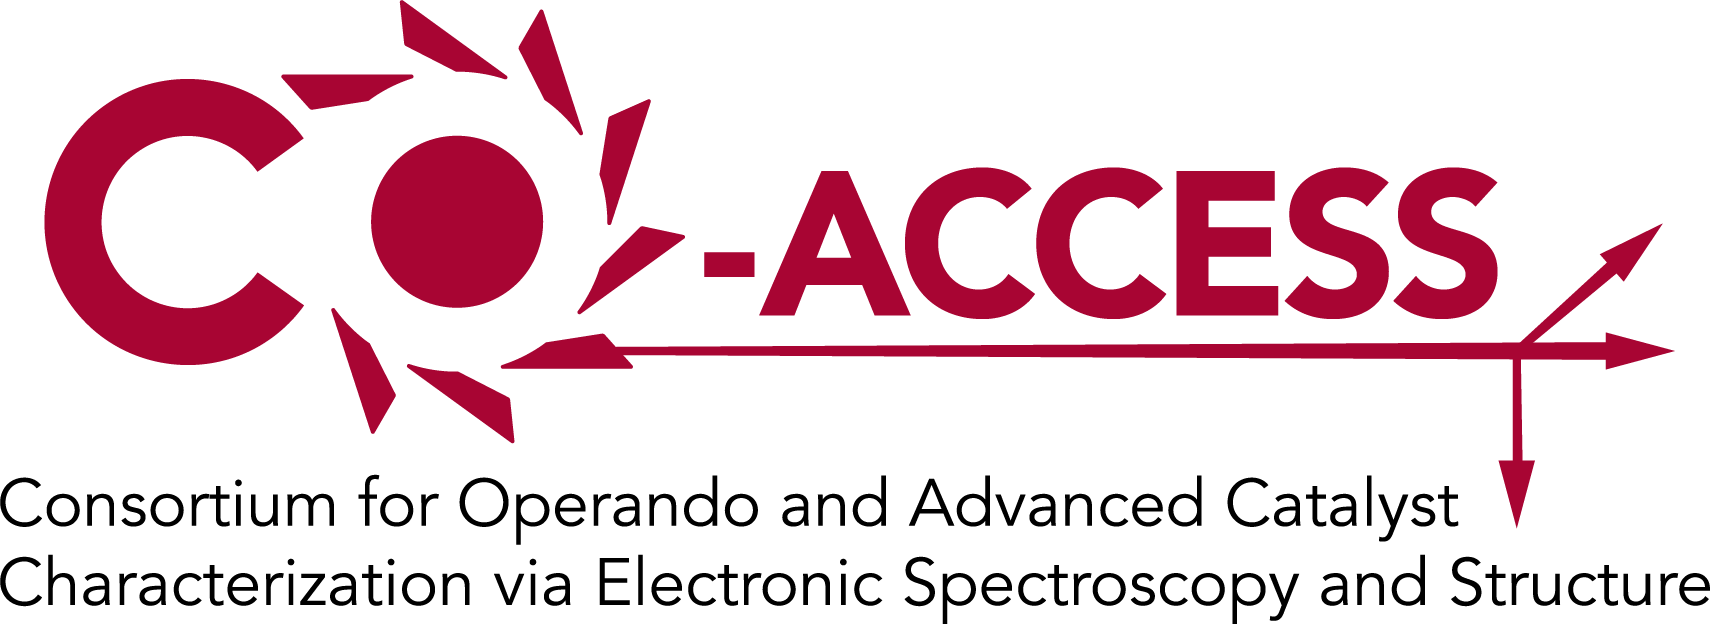 co_access_logo_text.png